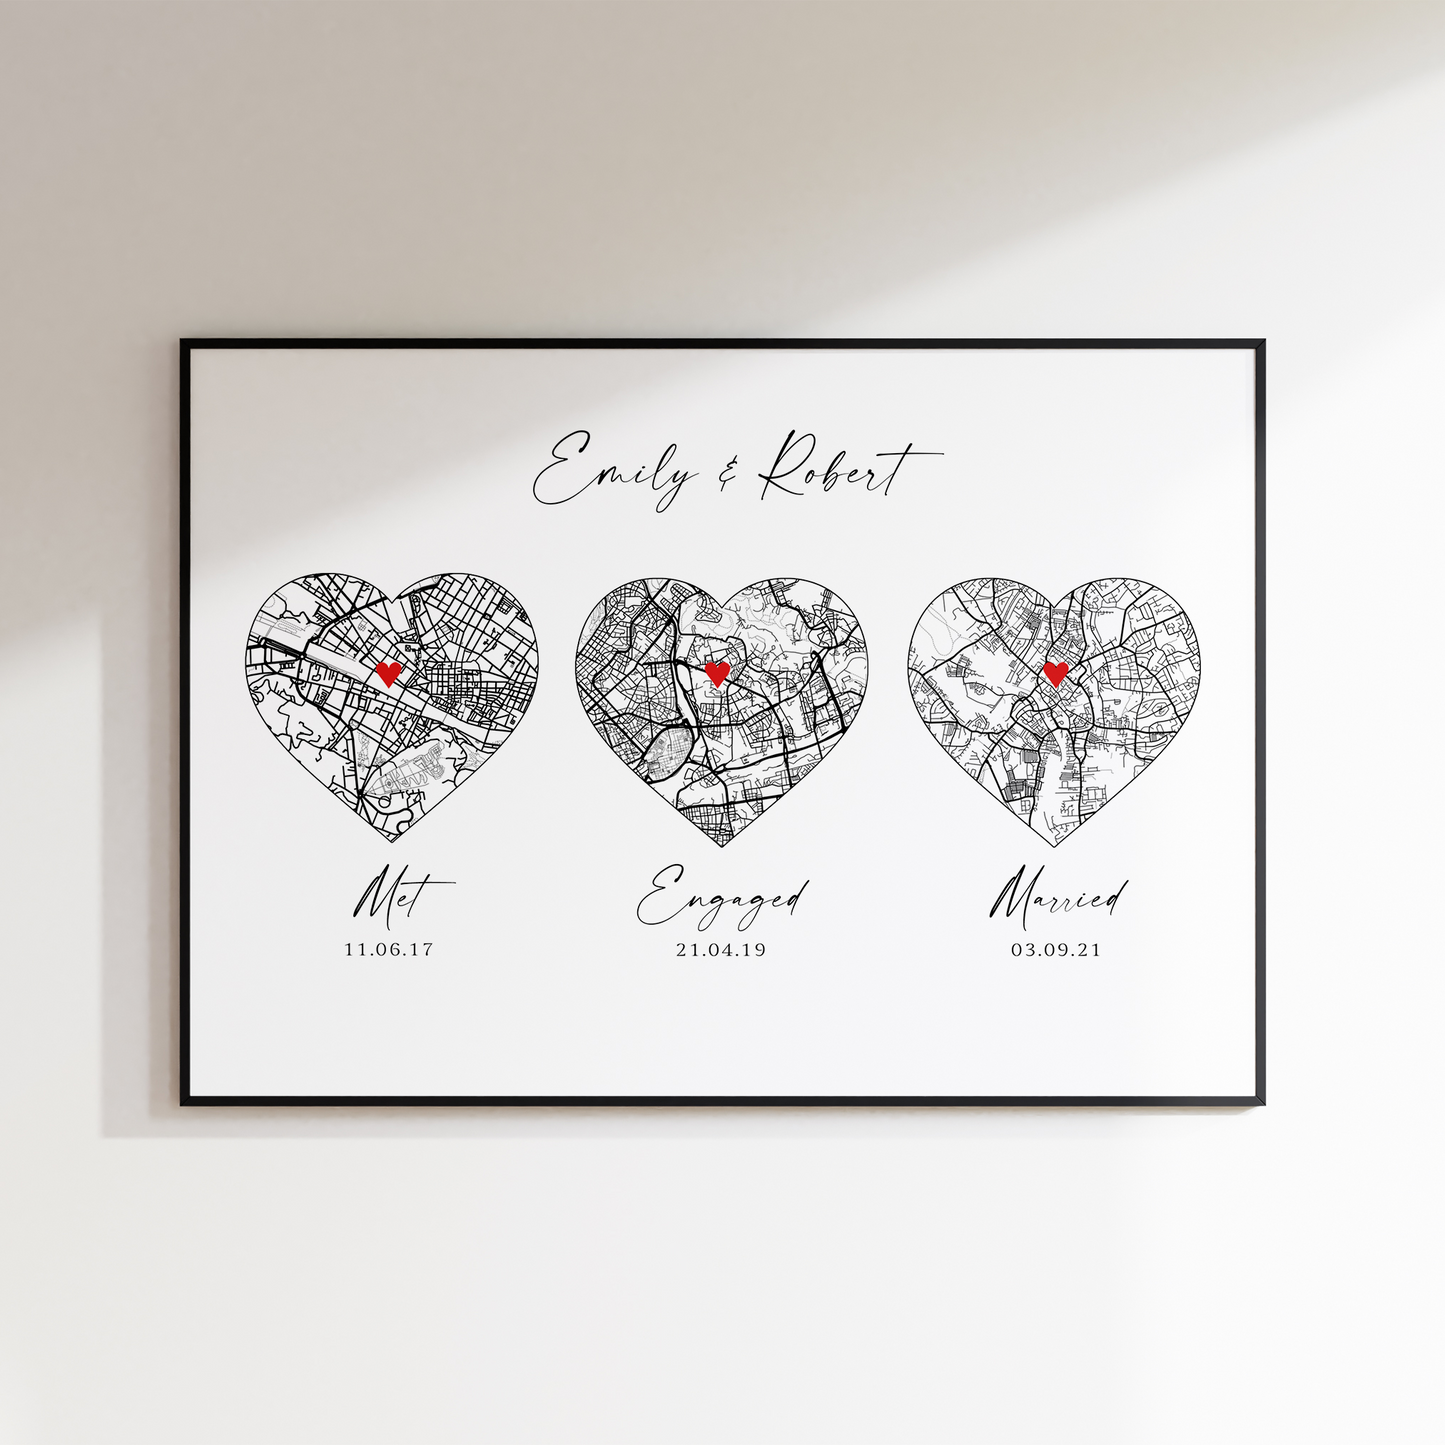 black and white triple city map print met engaed married personalised matte smooth white paperstock unframed